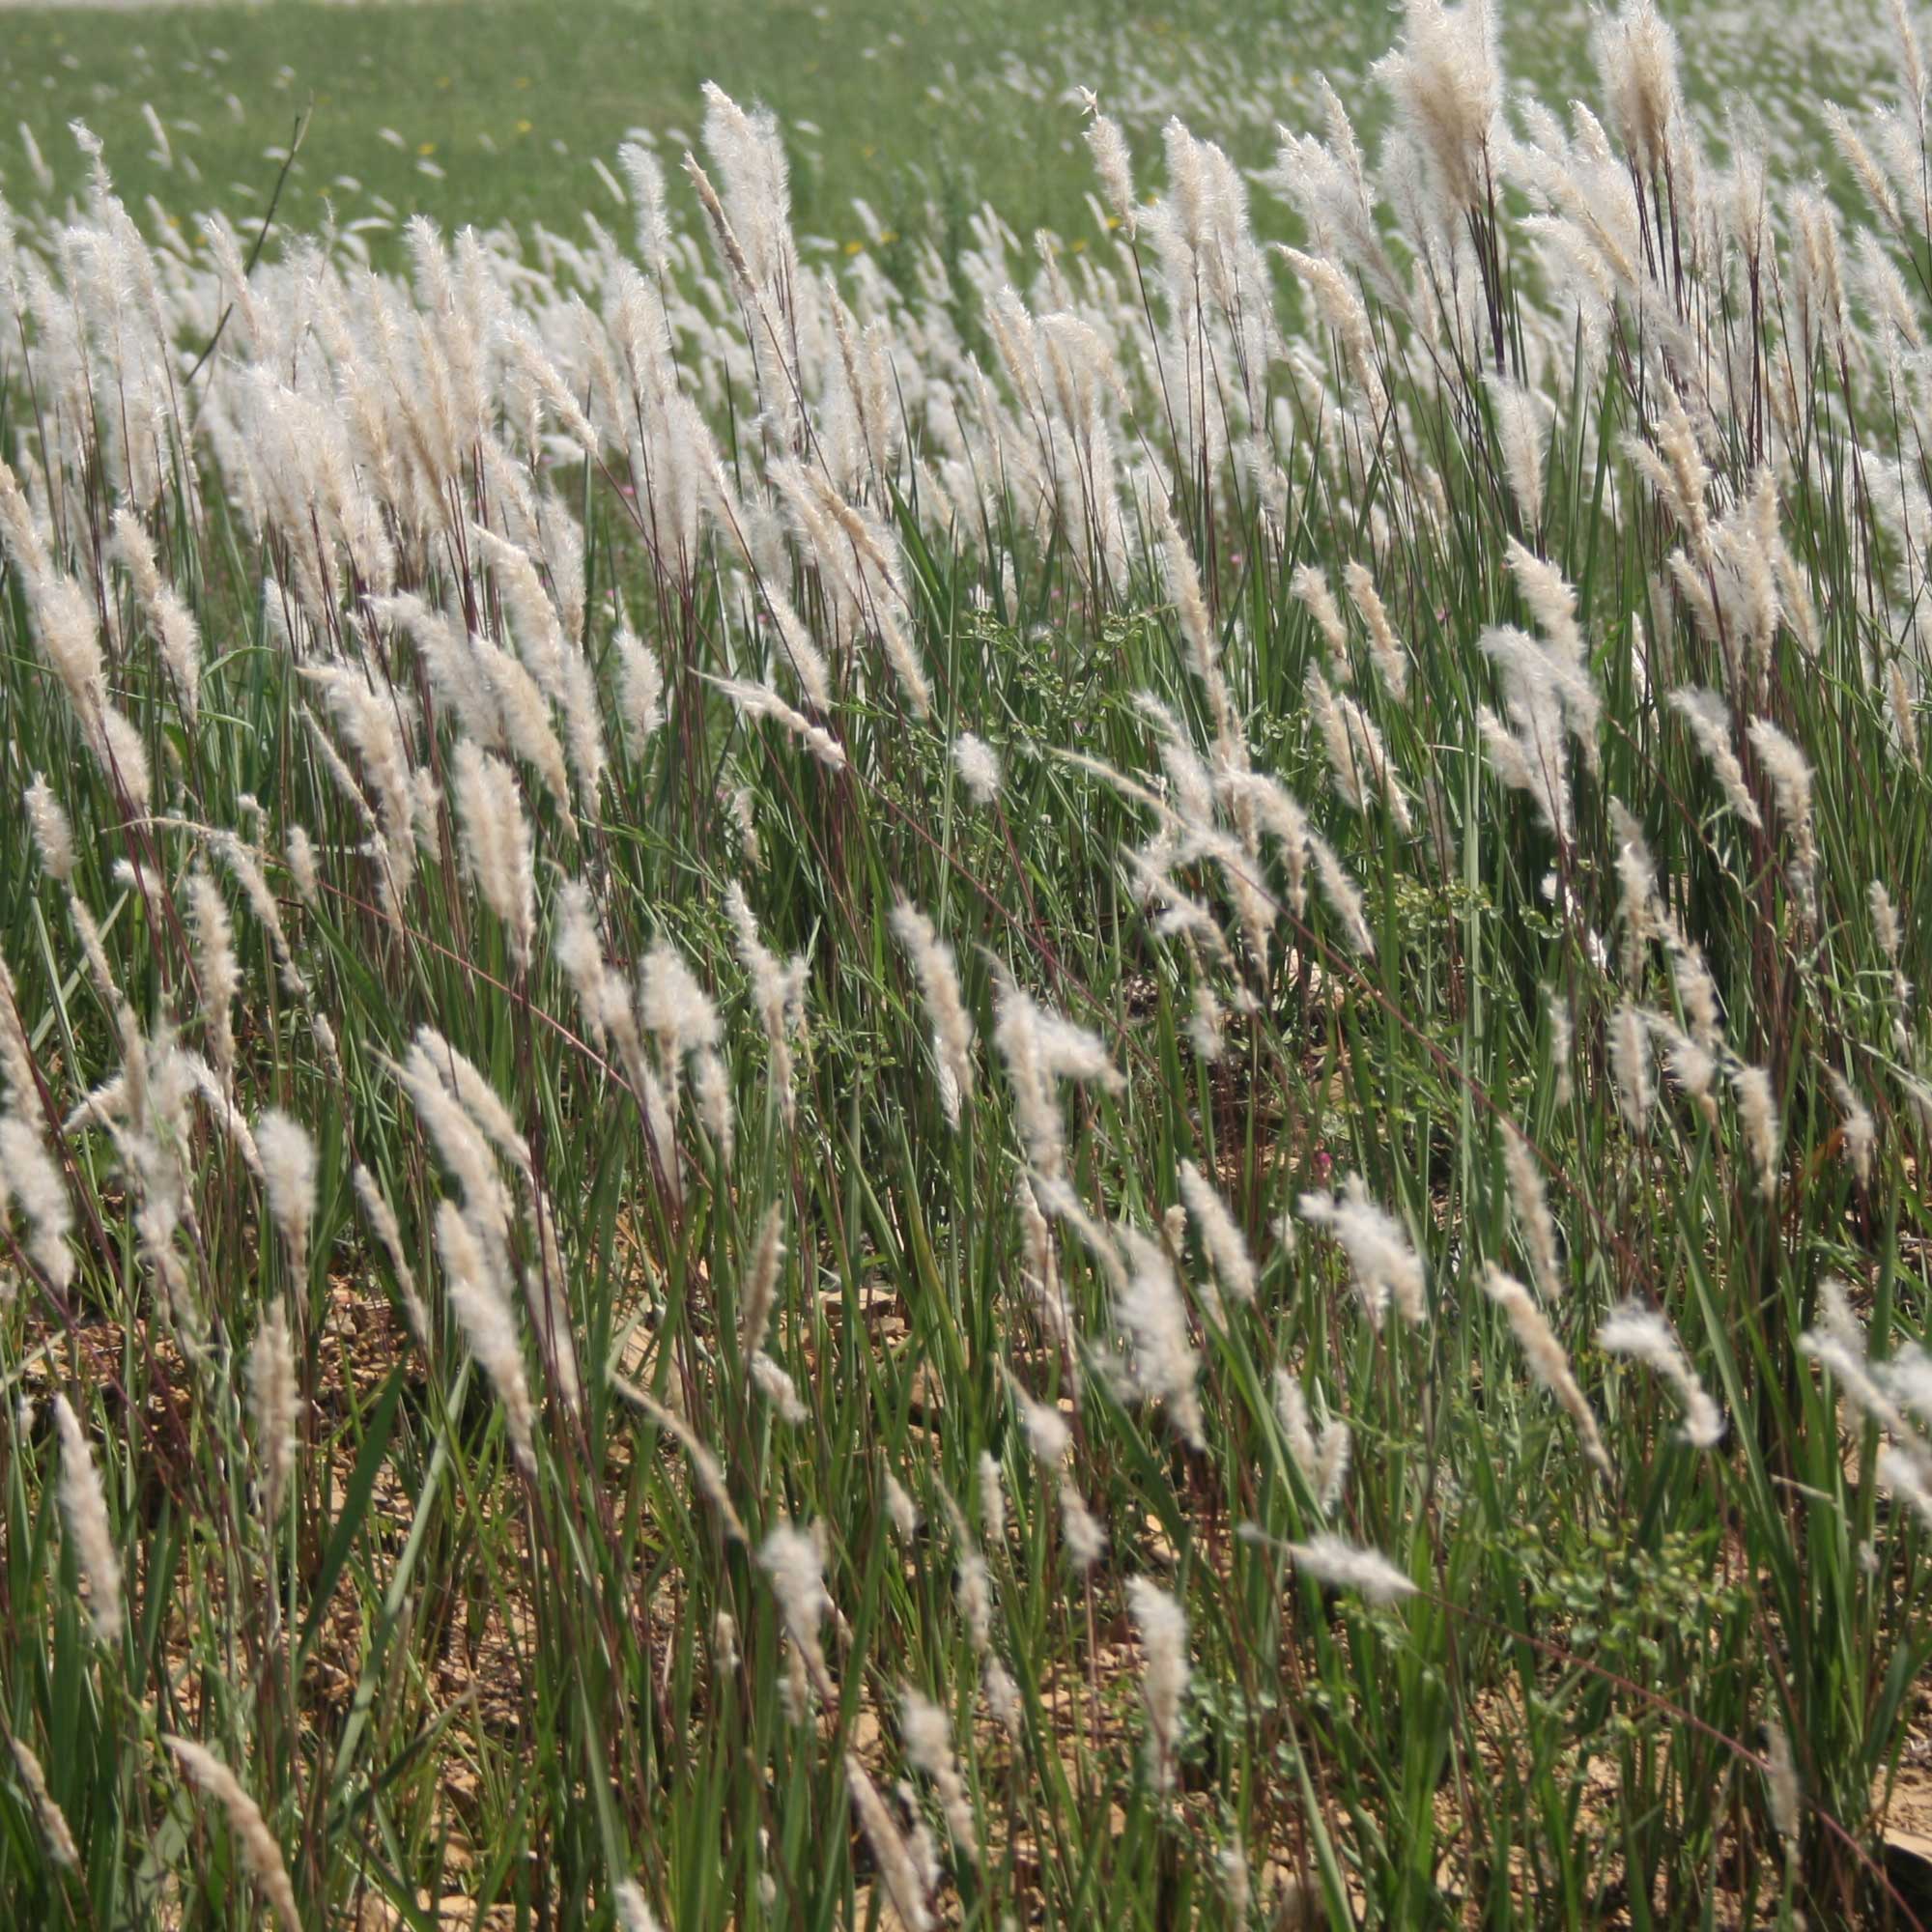 Photograph of cogongrass. The photo shows a large field of tall, green grasses with feathery while inflorescences.